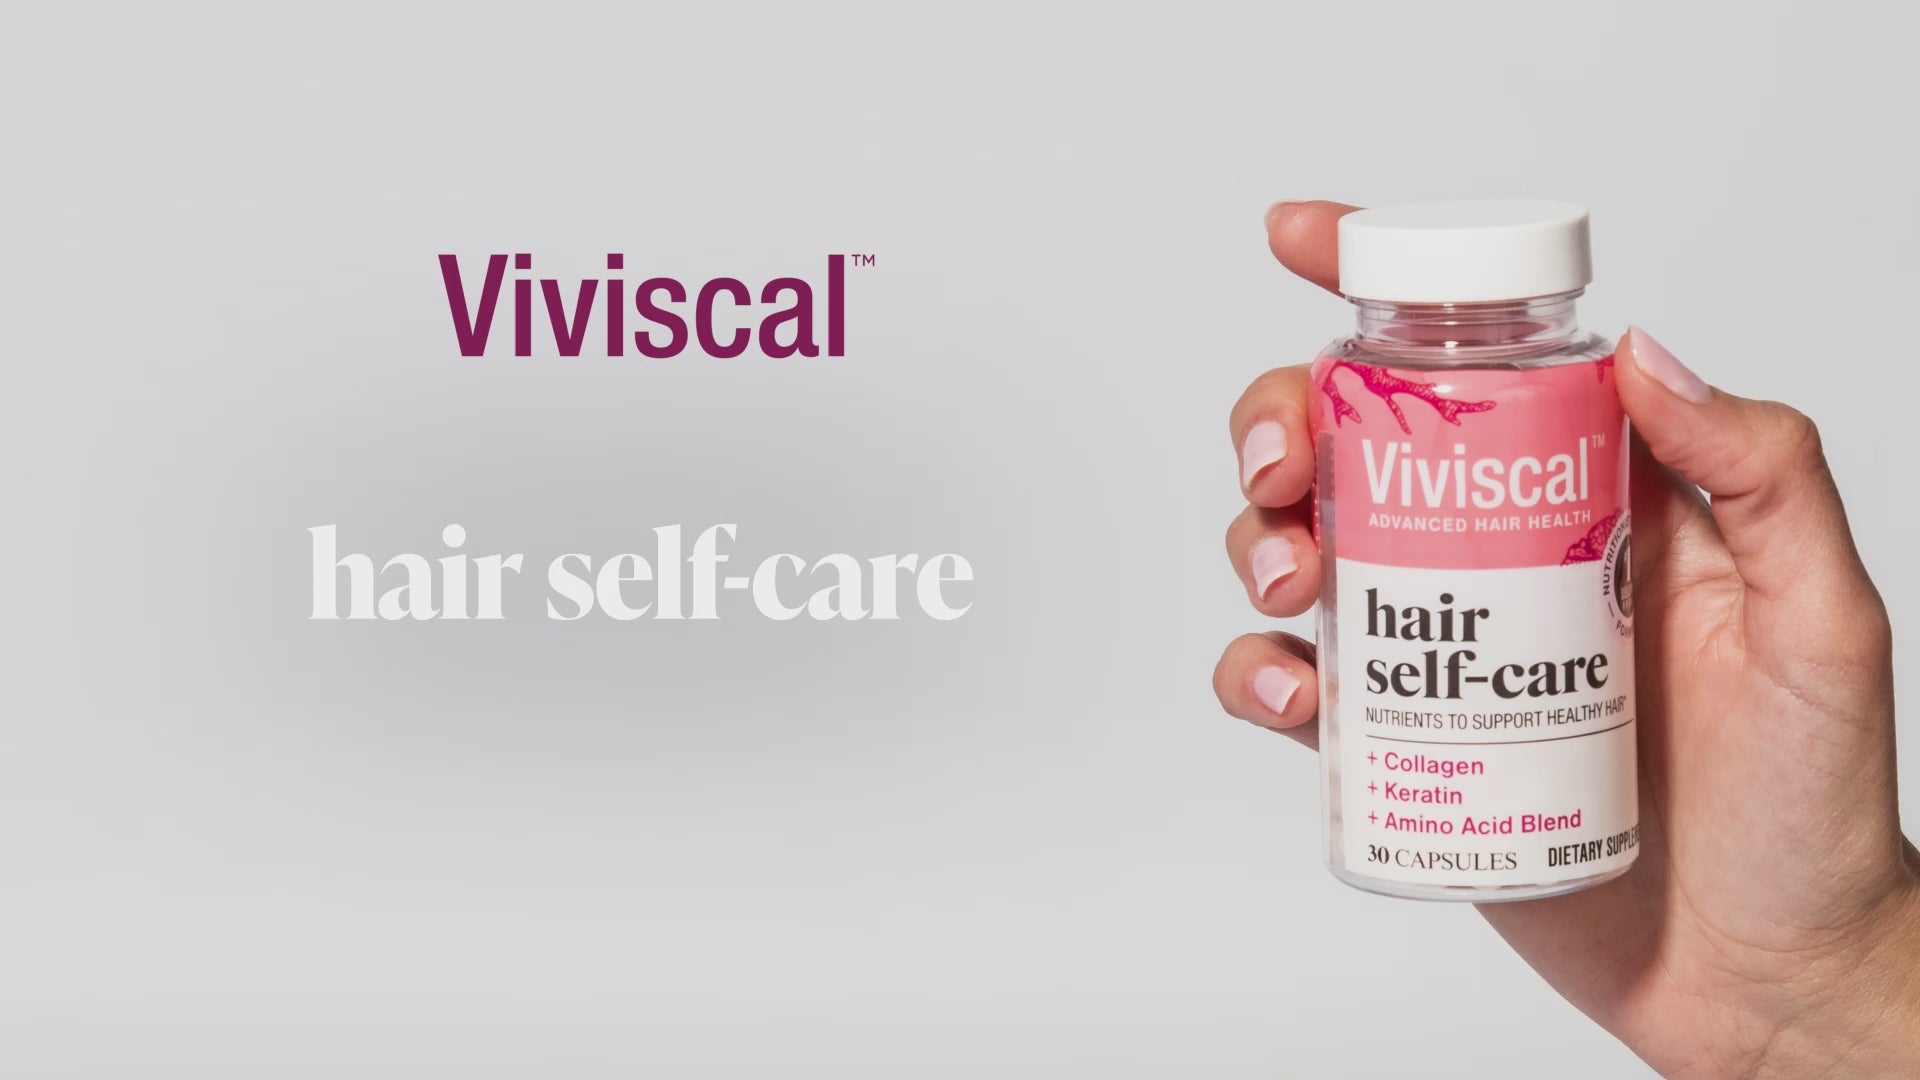 video of Viviscal hair self-care supplements